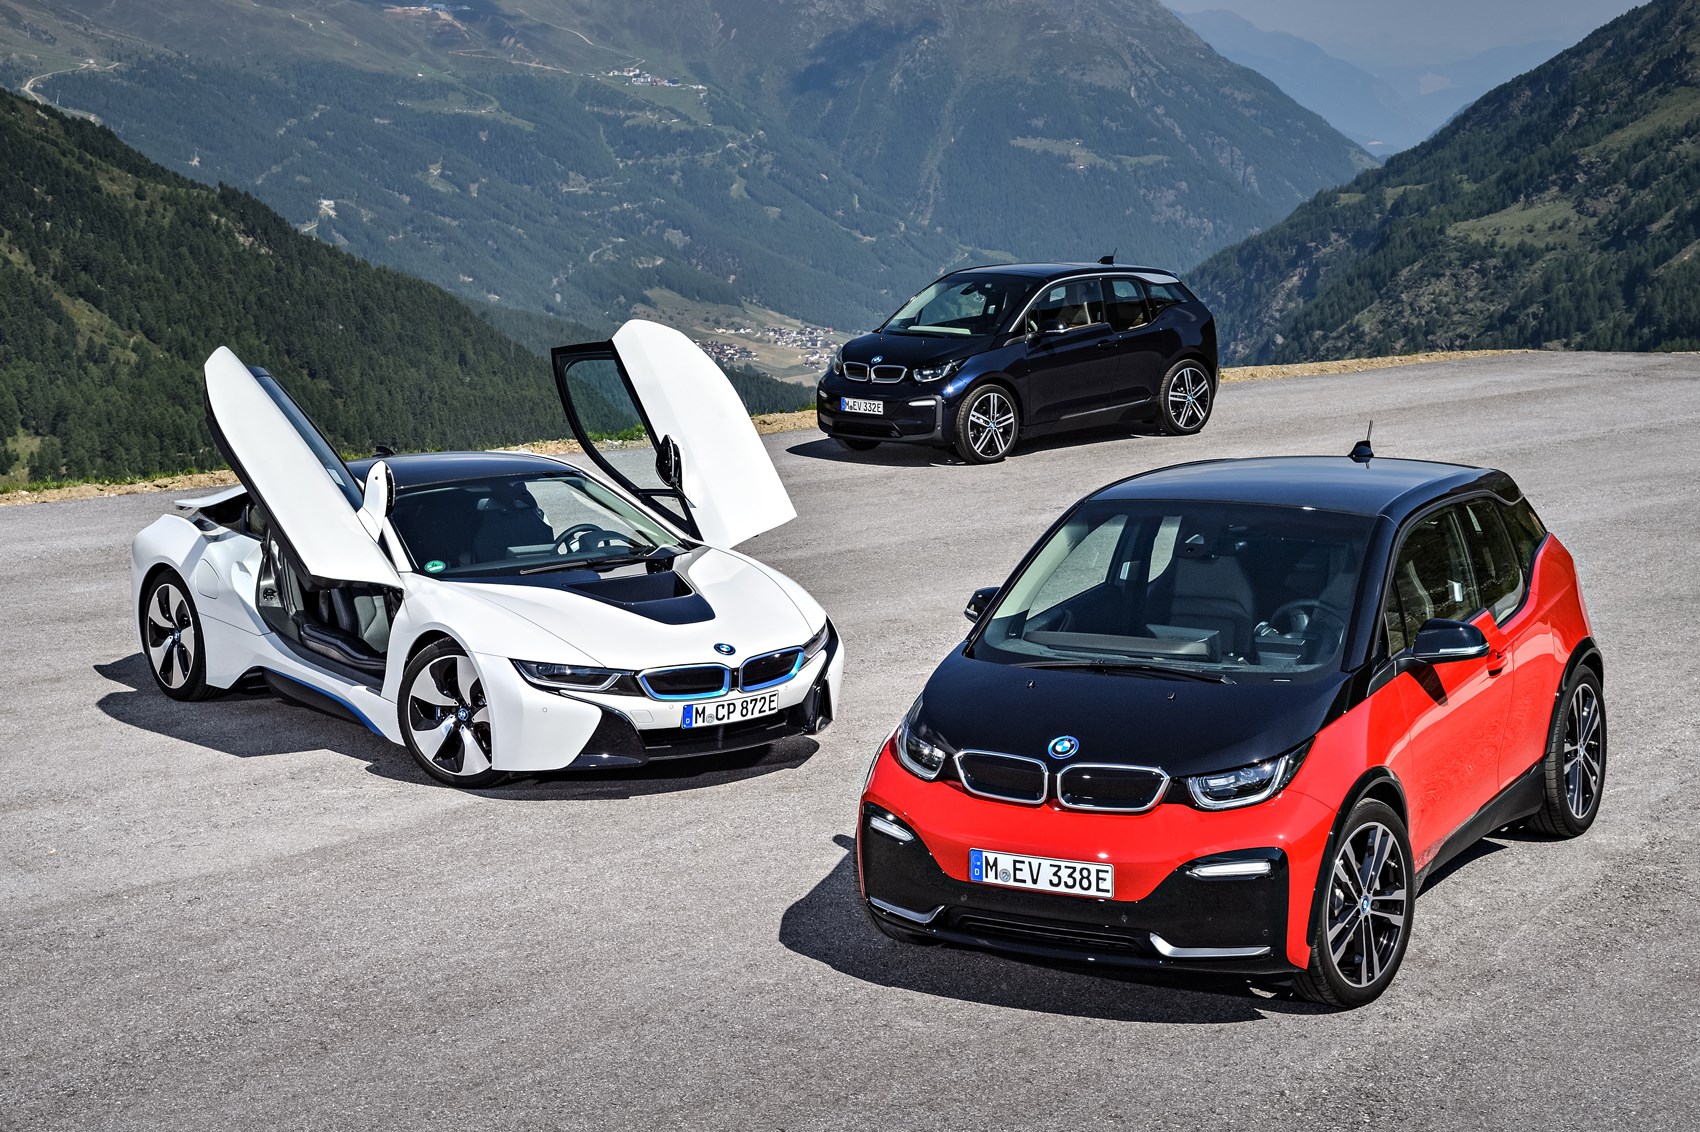 BMW electric: Munich's present and upcoming EVs in detail